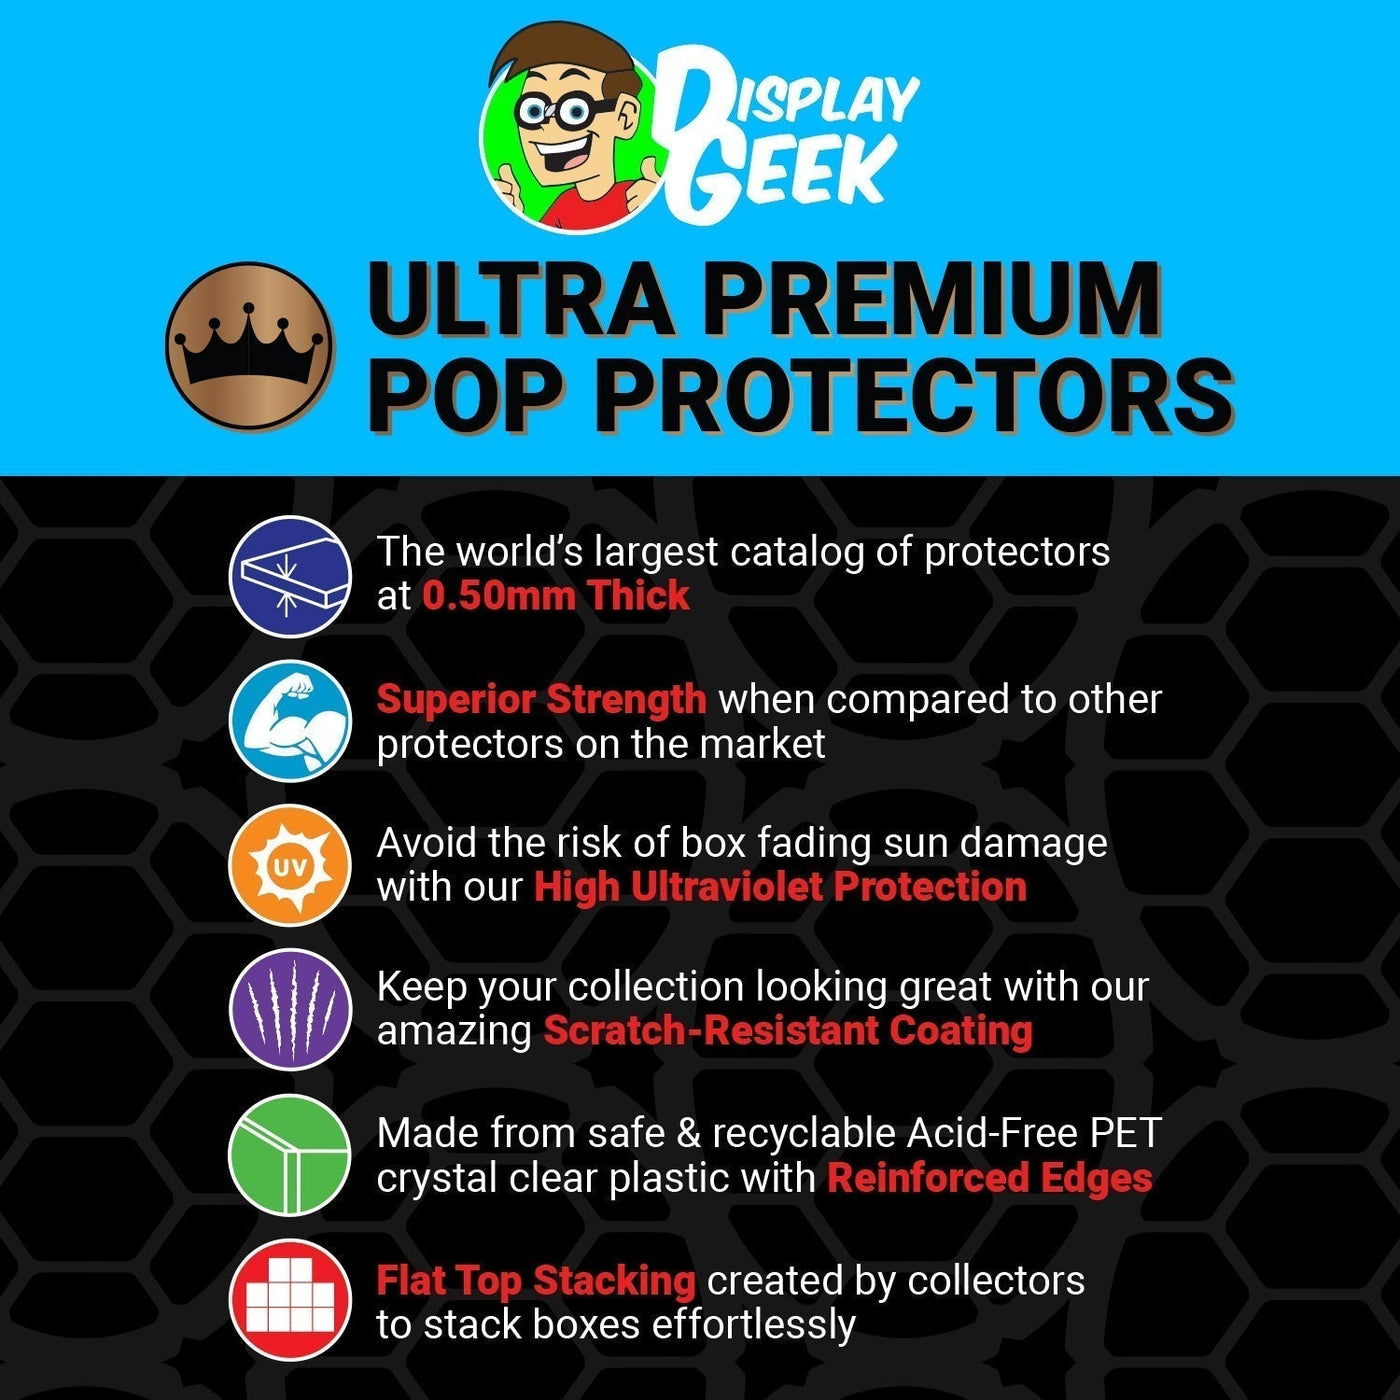 Pop Protector for 2 Pack Liang Shanbo & Zhu Yingtai Funko Pop on The Protector Guide App by Display Geek